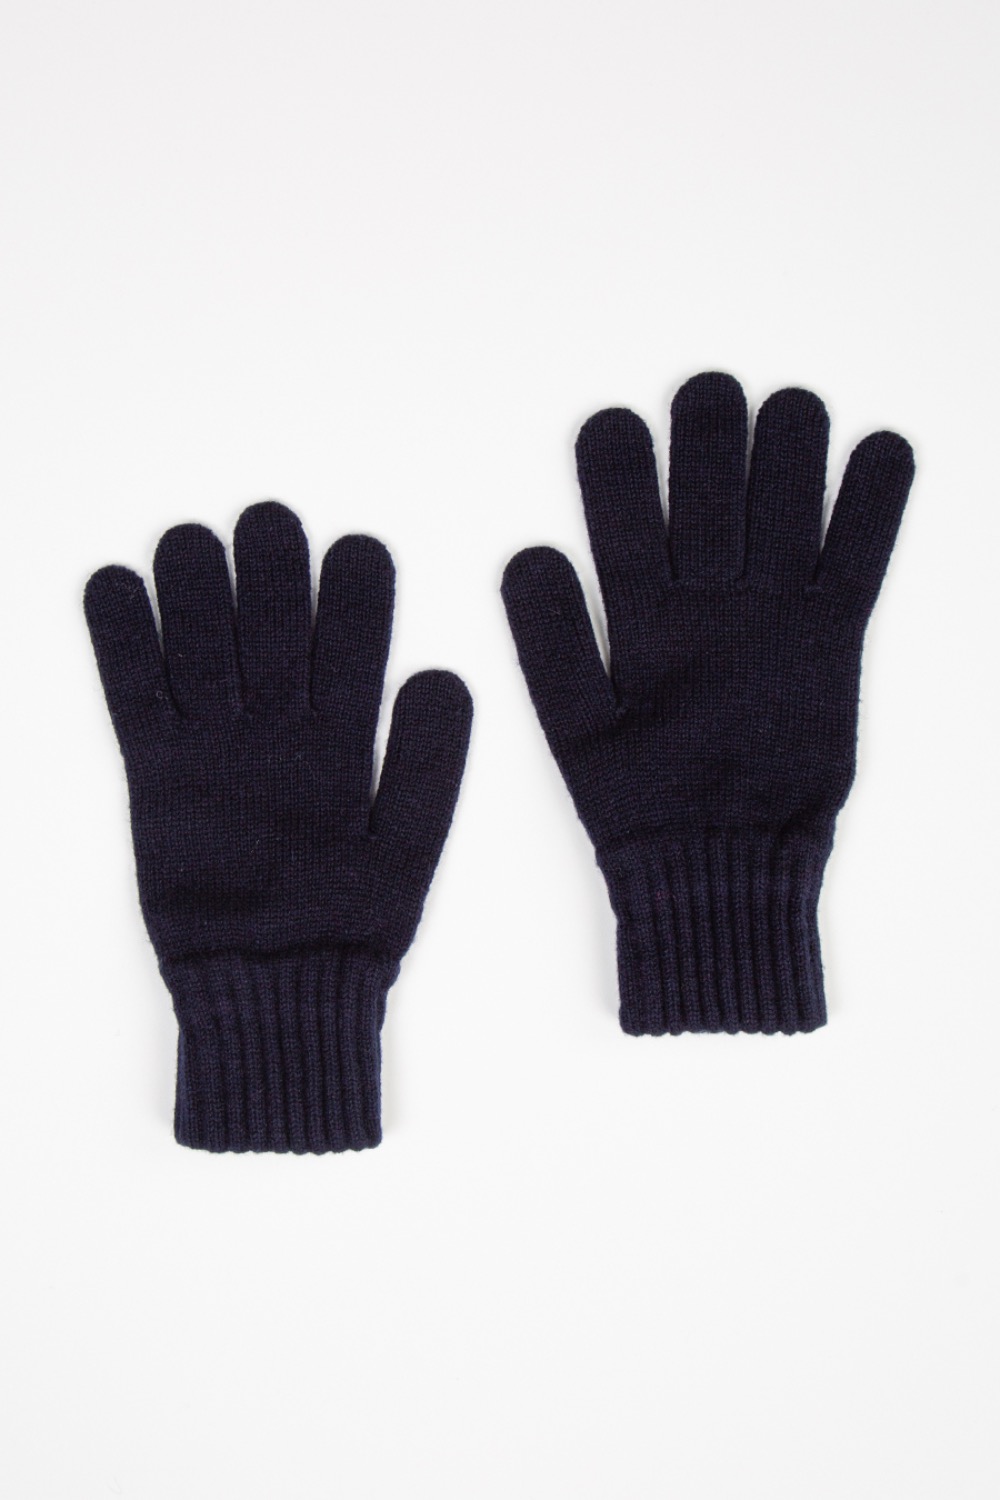 (CARRY OVER) DARK NAVY LAMBSWOOL KNITTED GLOVES